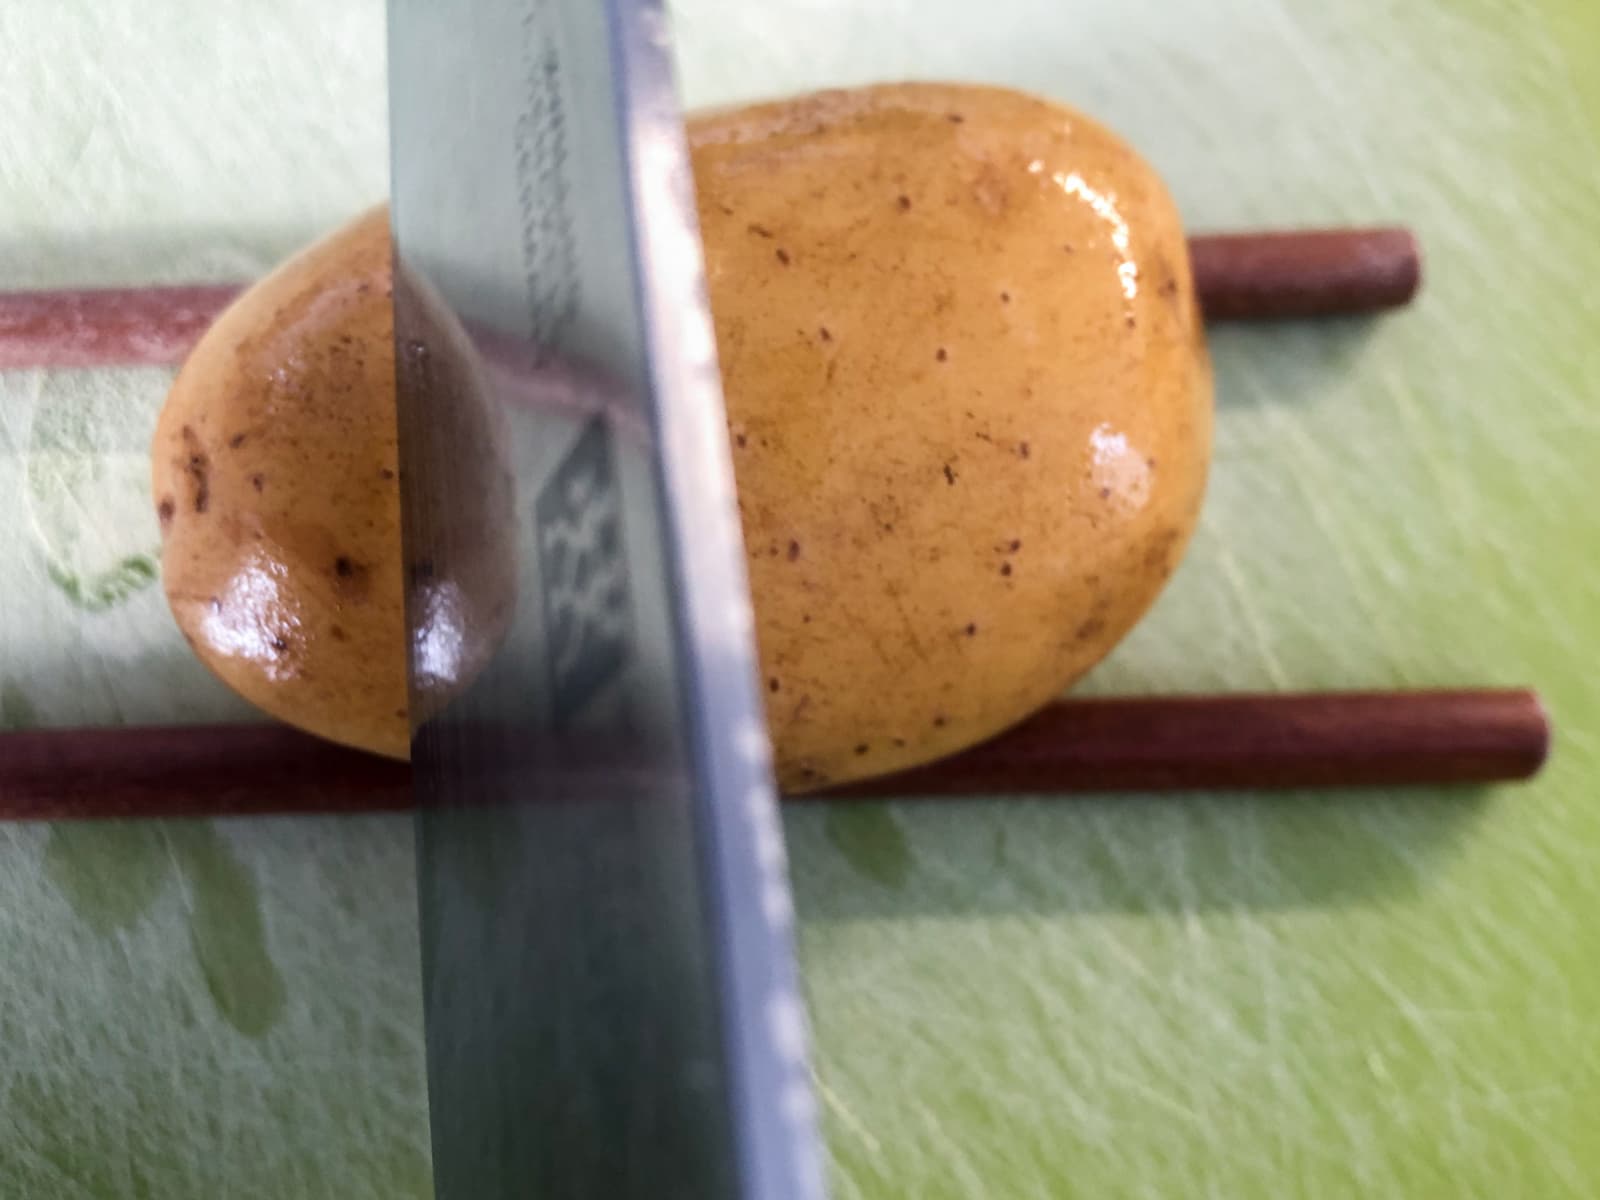 Using 2 chopsticks to stop a knife from cutting all the way through potatoes